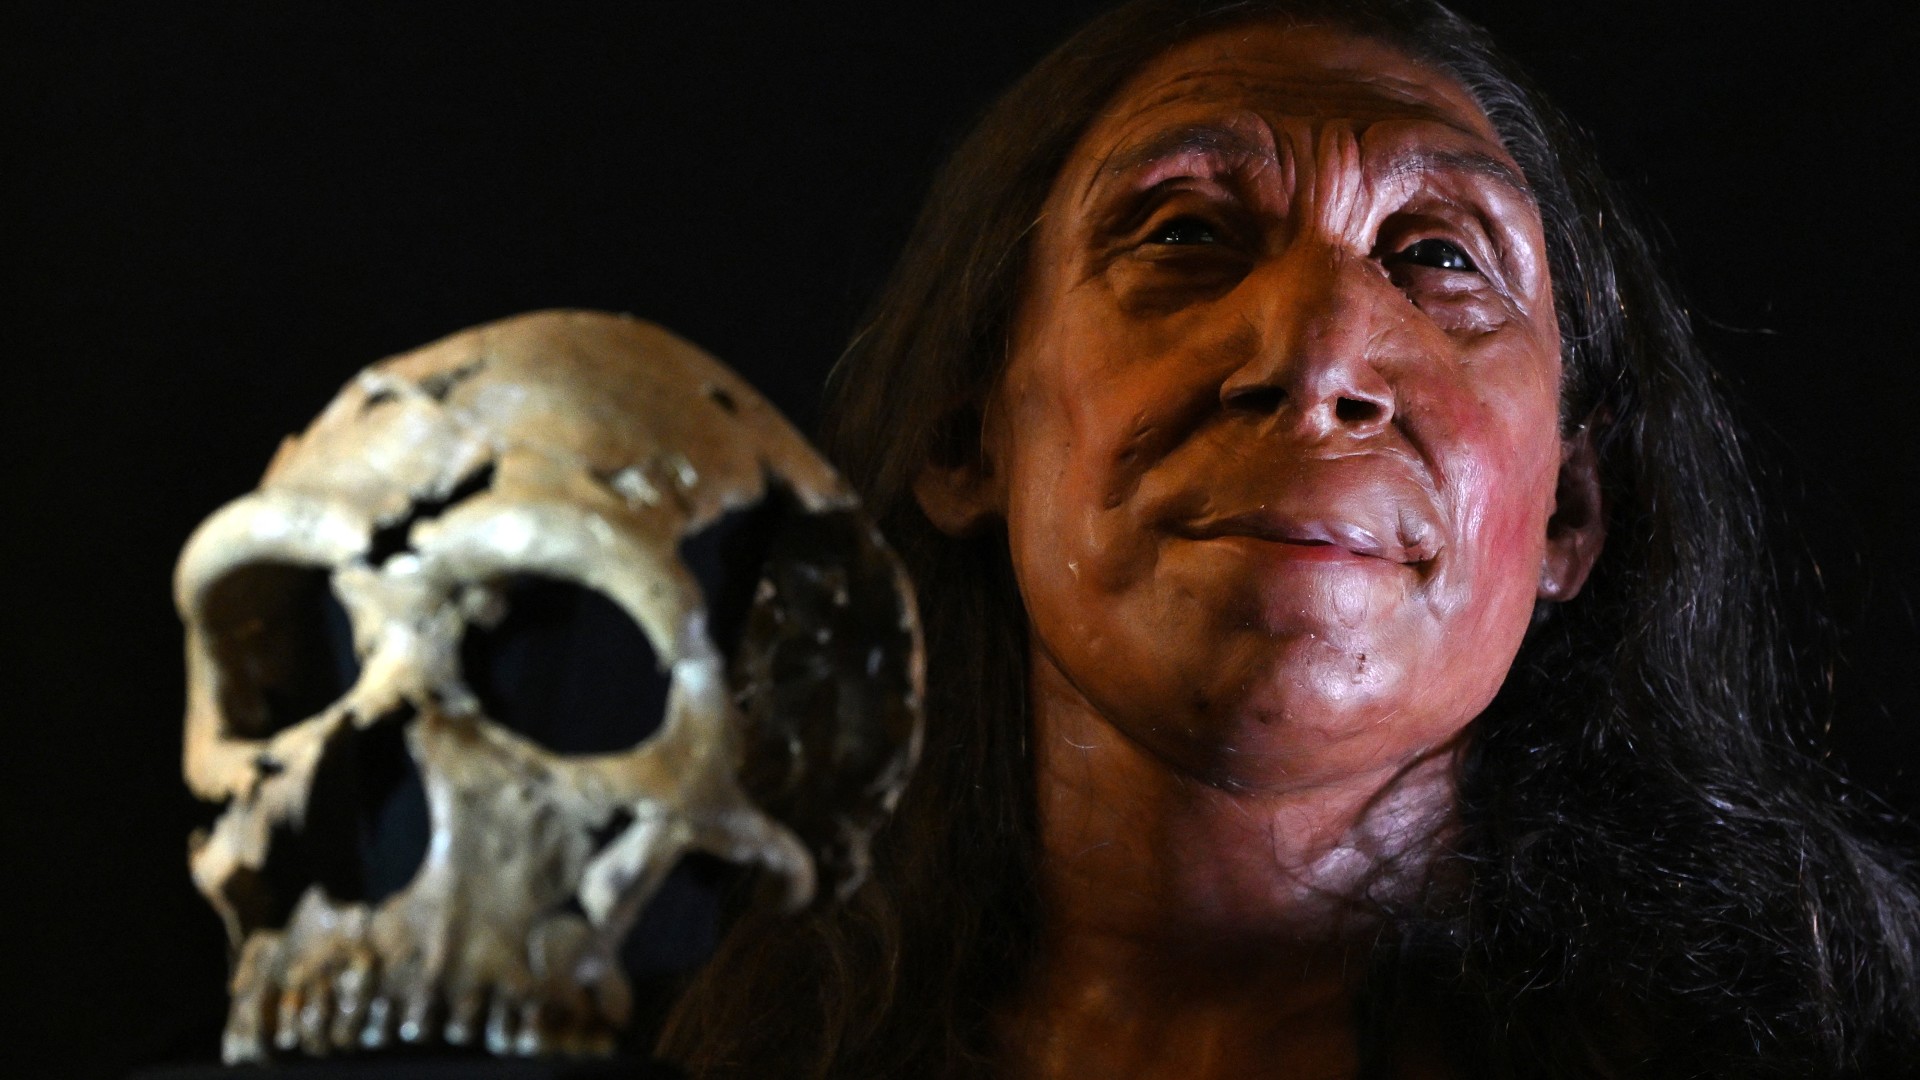 Side-by-side image of the skull of the Neanderthal 'Shanidar Z' on the left with her facial reconstruction on the right. She can be seen with flowing long brown hair and a determined gaze.